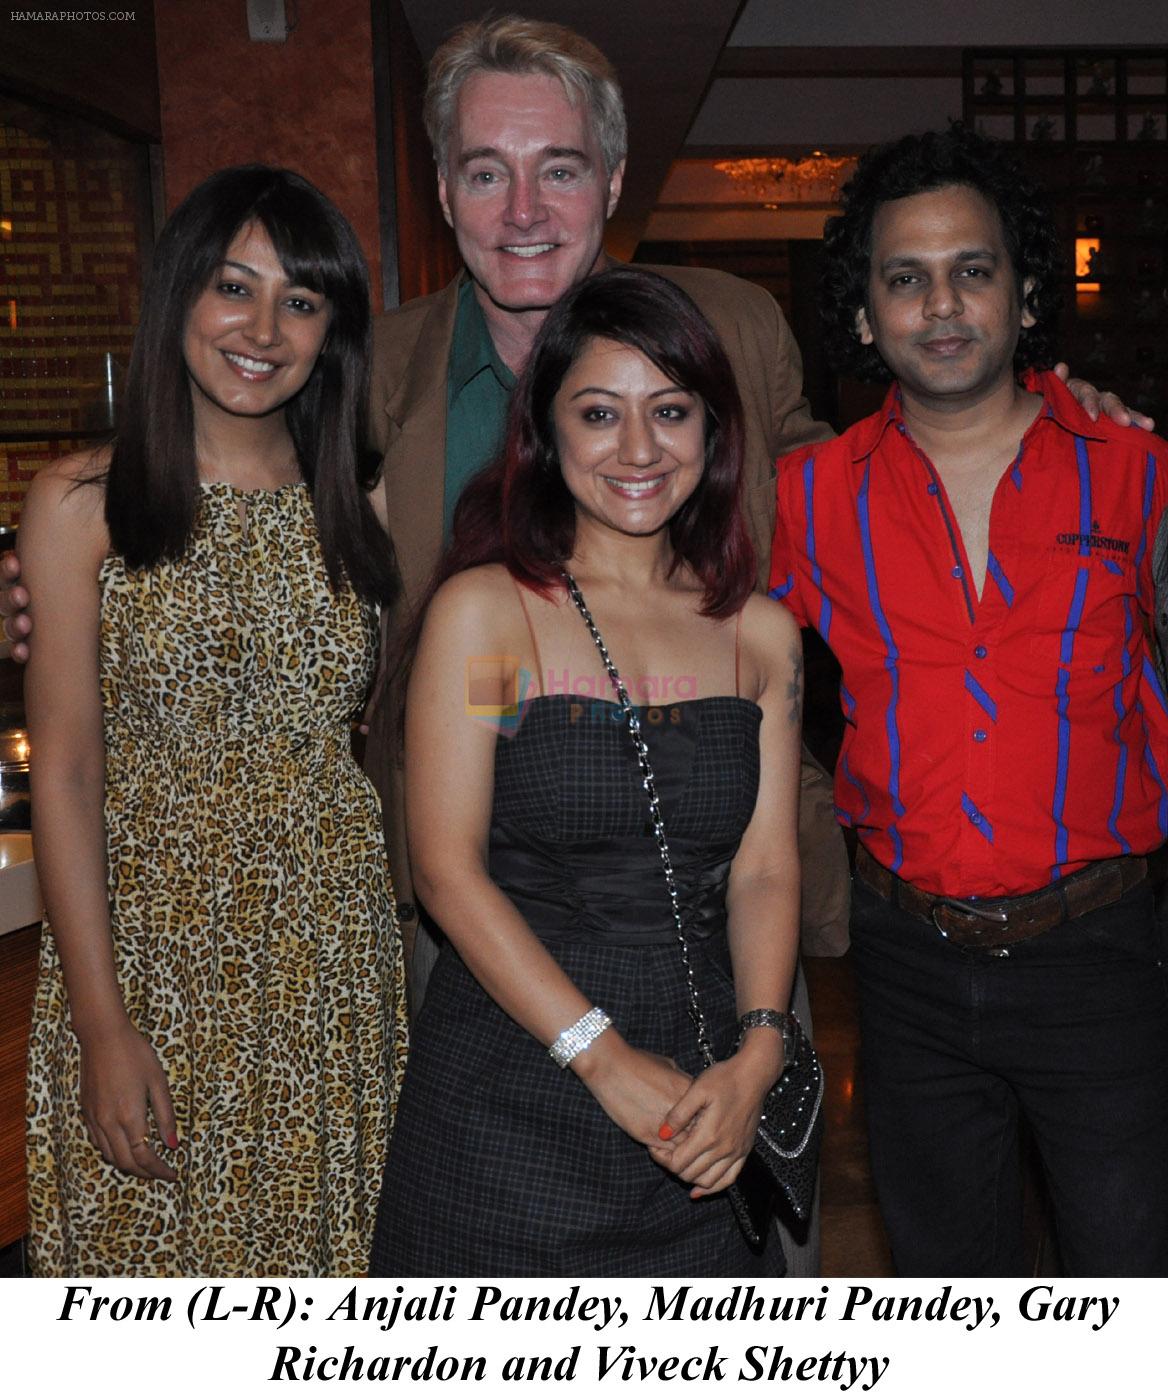 Anjali Pandey, Madhuri Pandey, Gary Richardson and Viveck Shettyy at The International Womans Day Celebrations in The Grand Sarovar Premiere on 8th March 2012